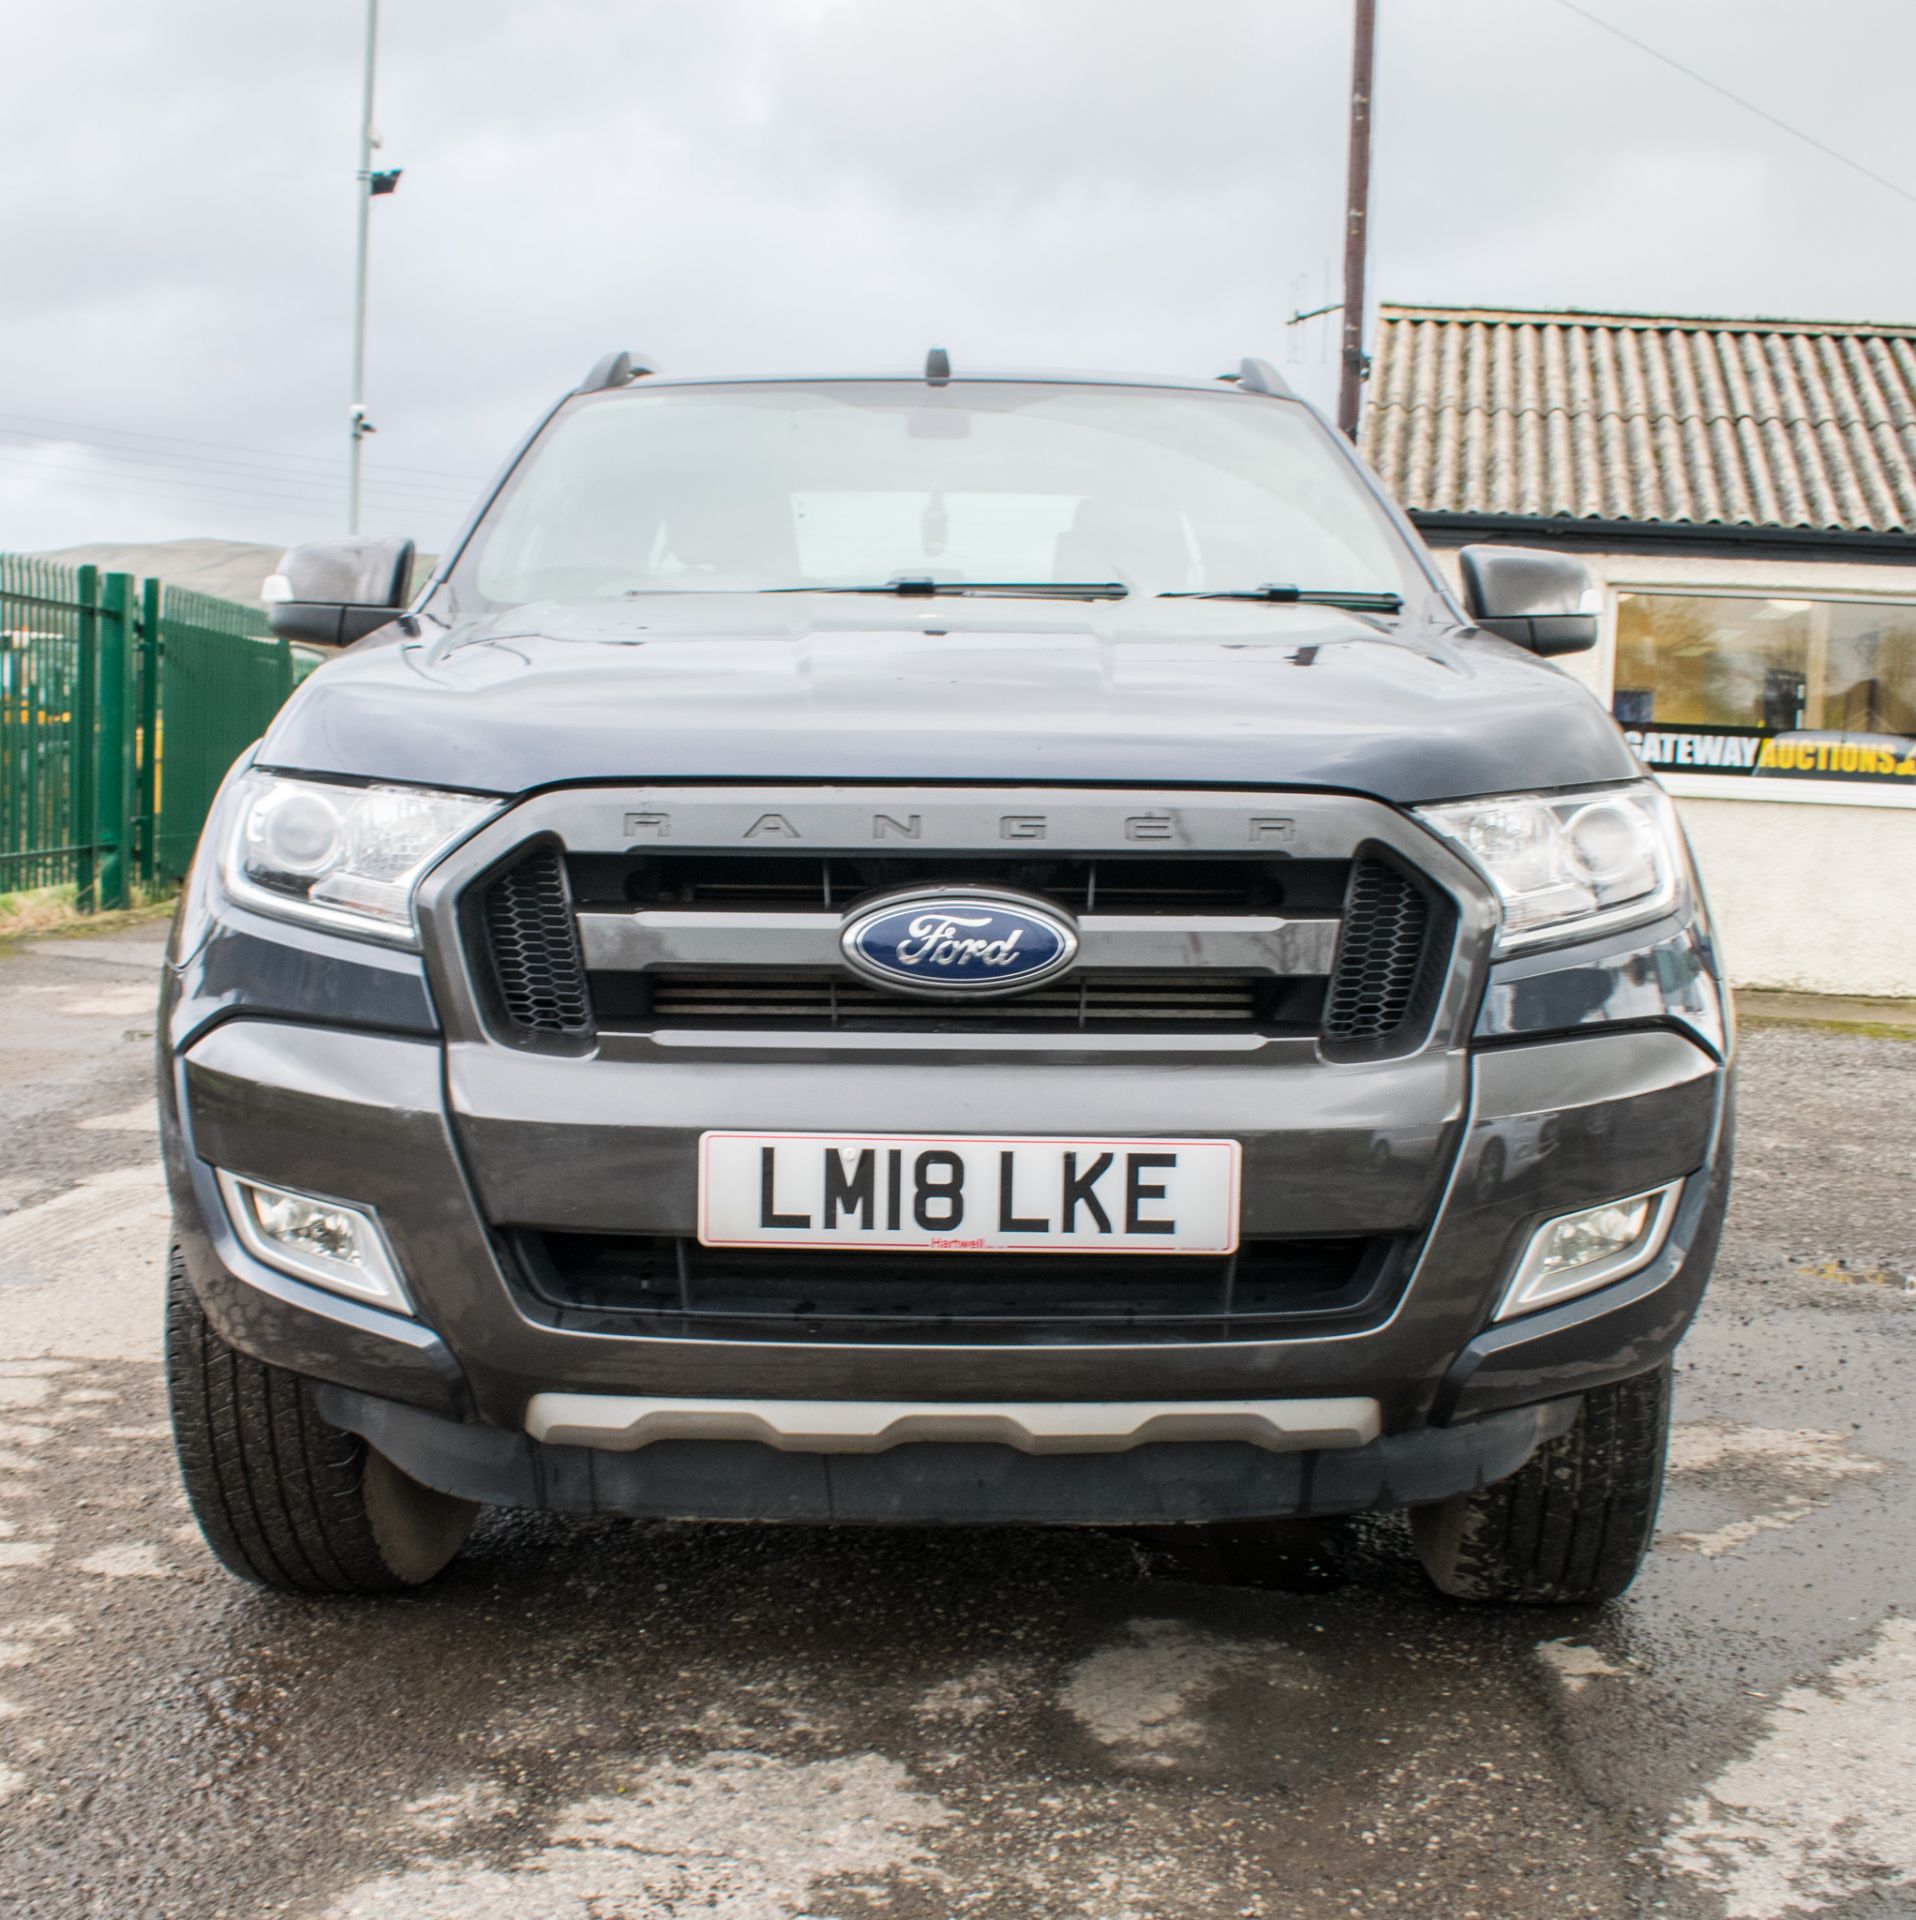 Ford Ranger Wildtrak 4 x 4 DCB TDCI automatic pick-up Registration number: LM18 LKE Date of - Image 5 of 24